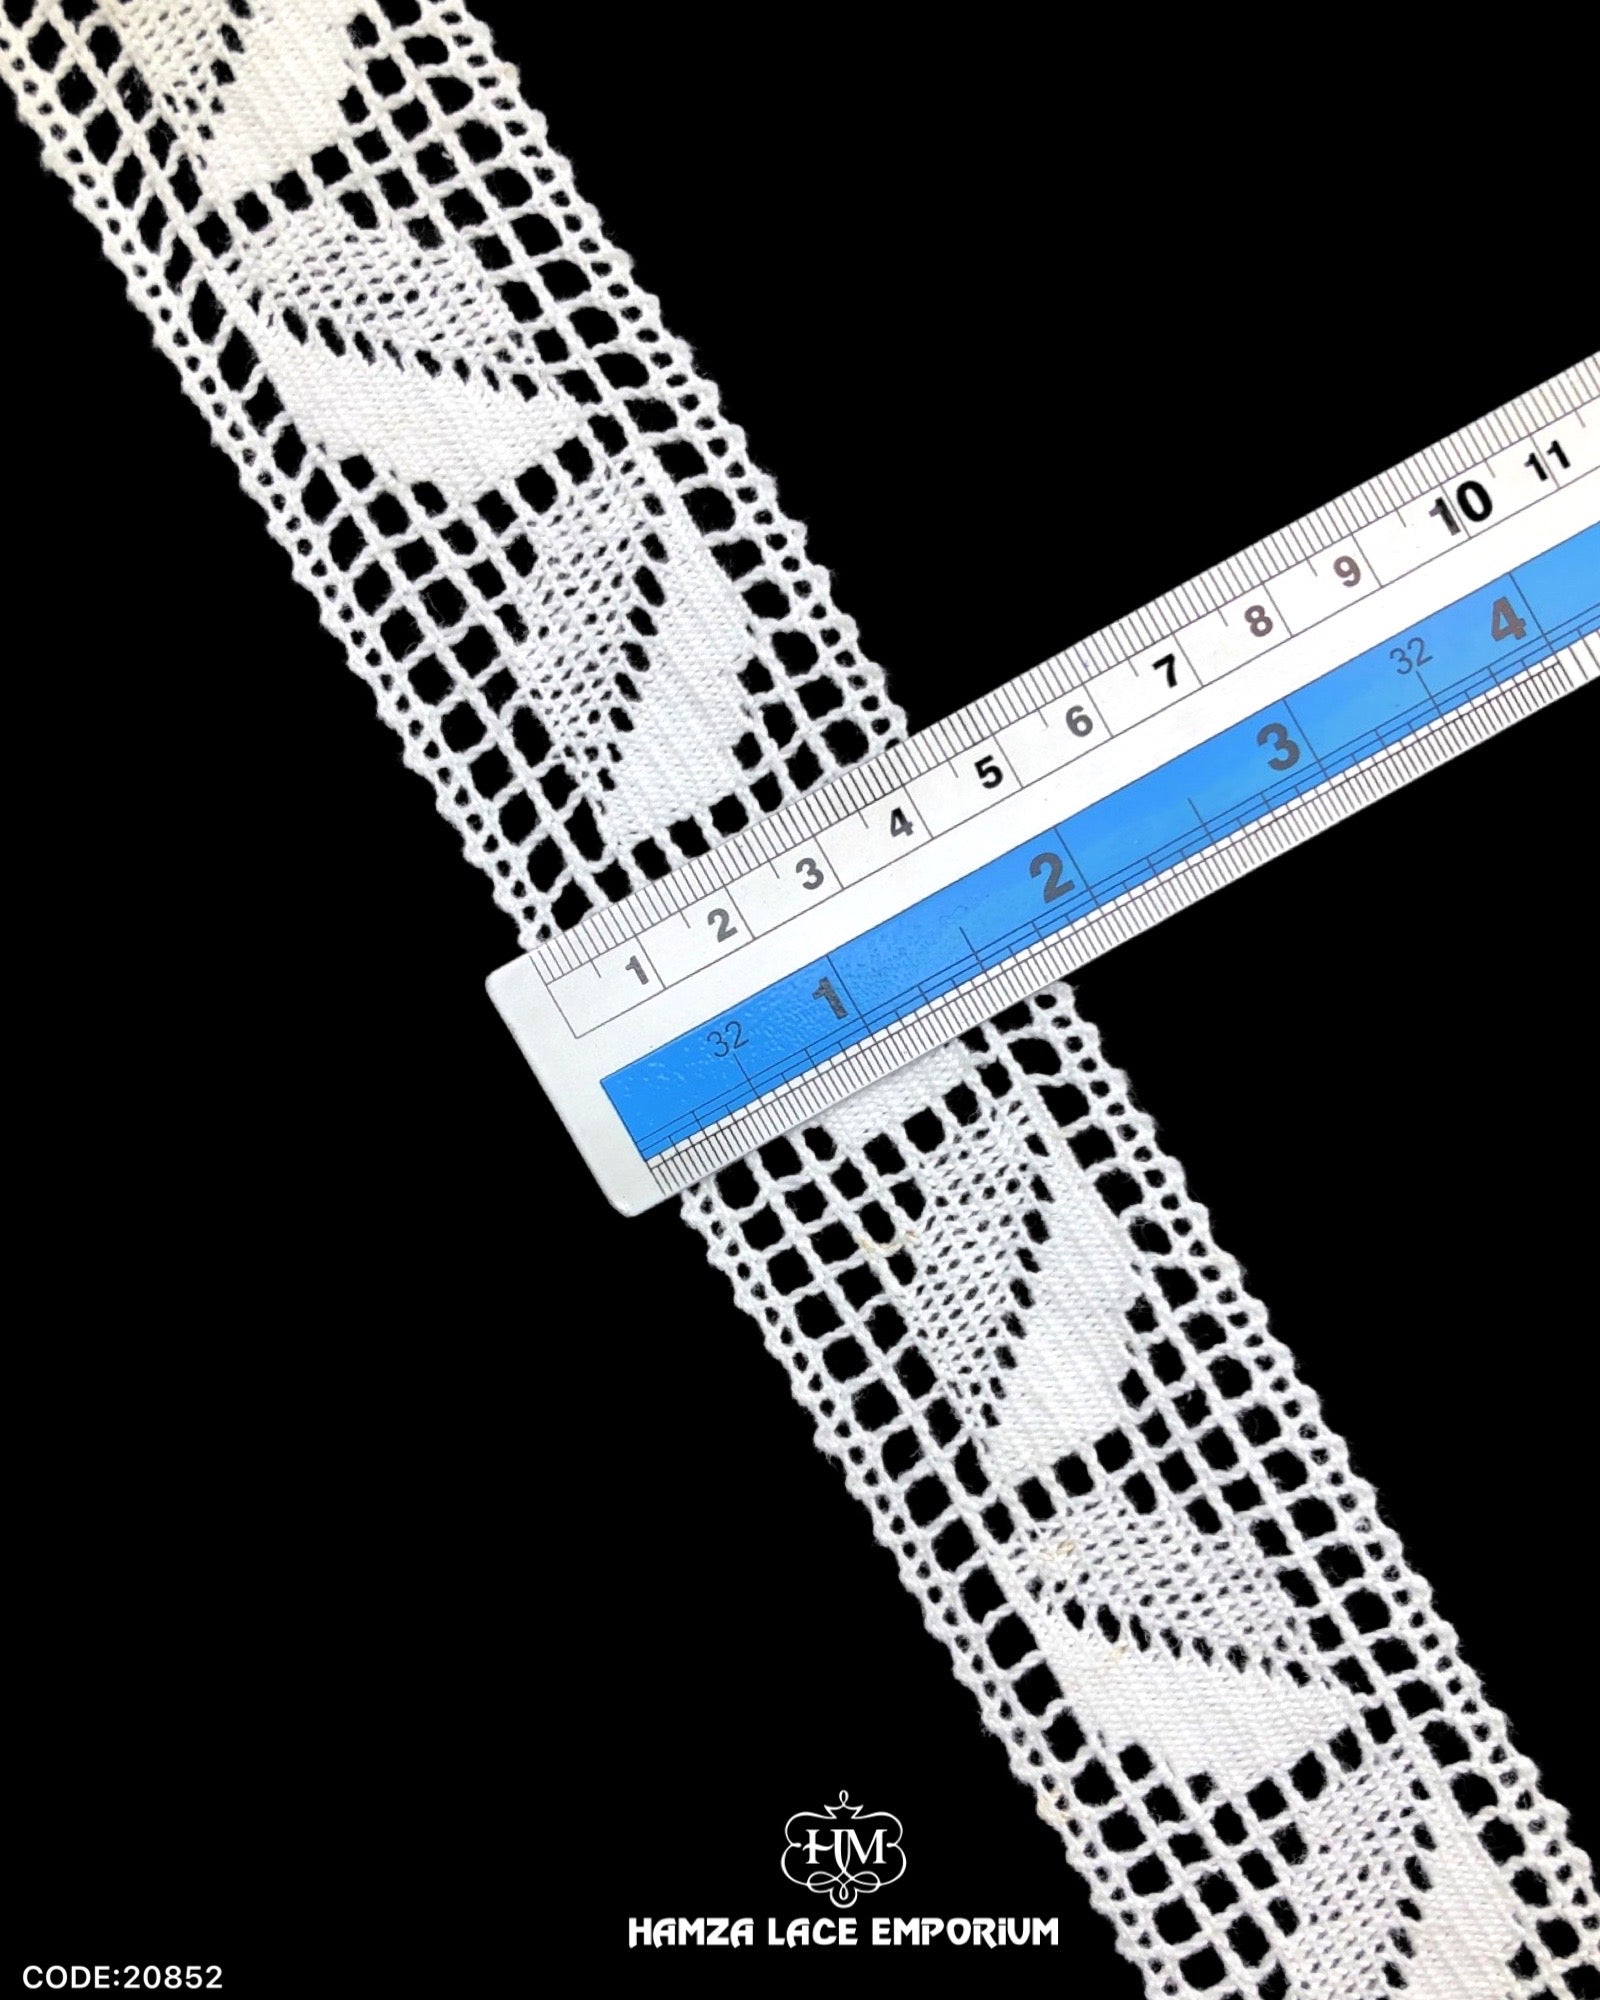 Size of the 'Center Filling Crochet Lace 20852' is shown with the help of a ruler as '2.5' inches